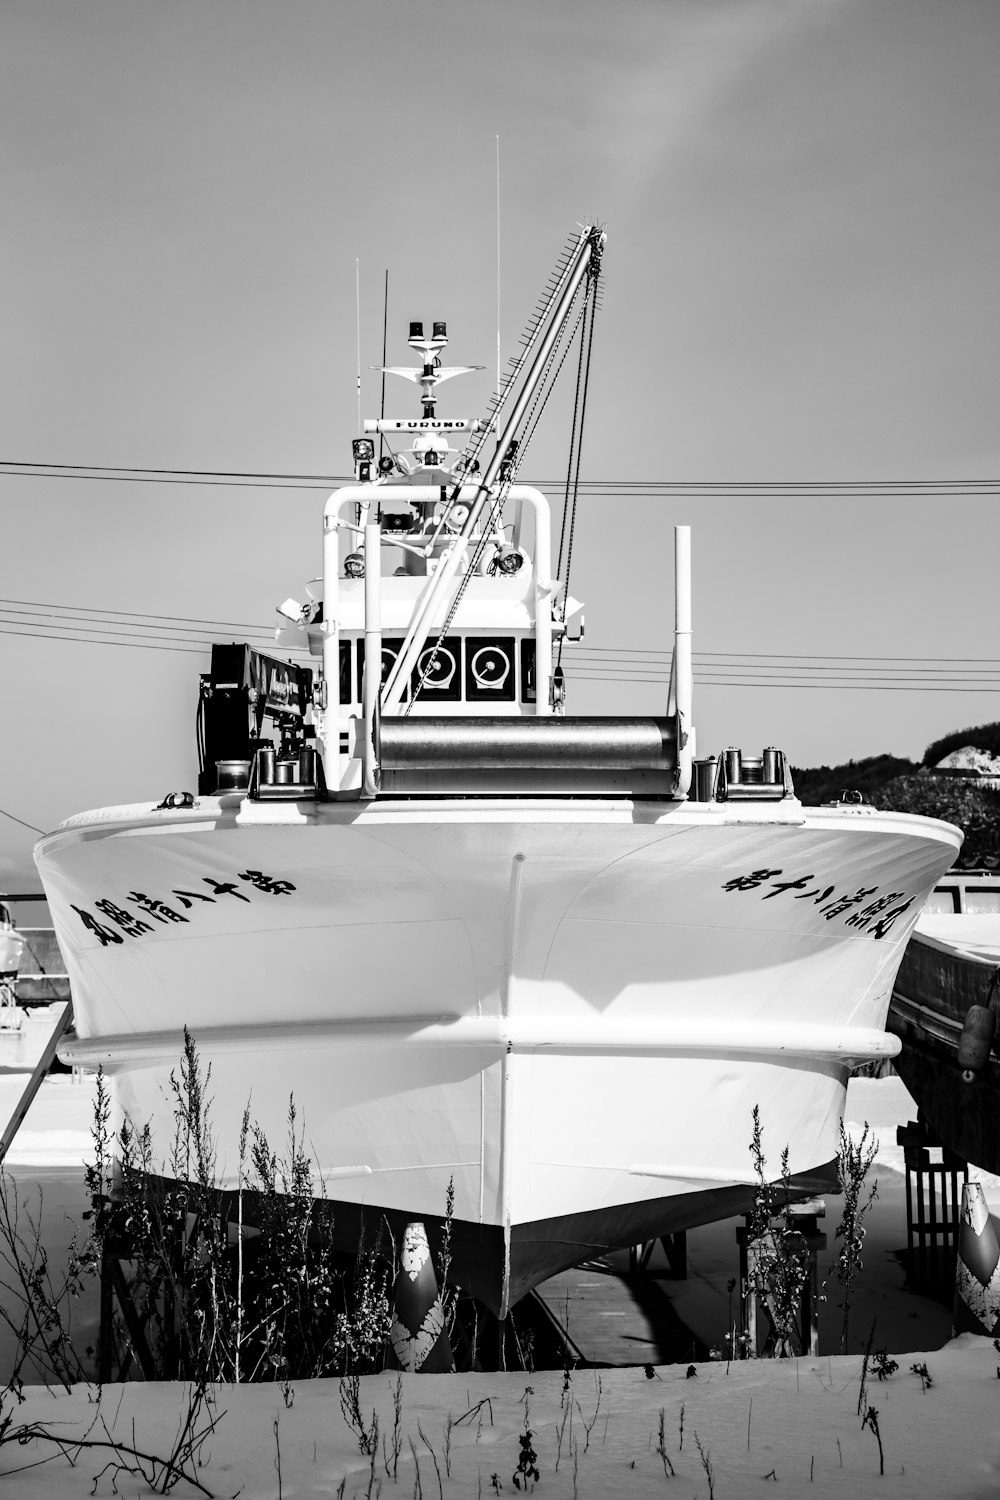 grayscale photo of white boat on body of water